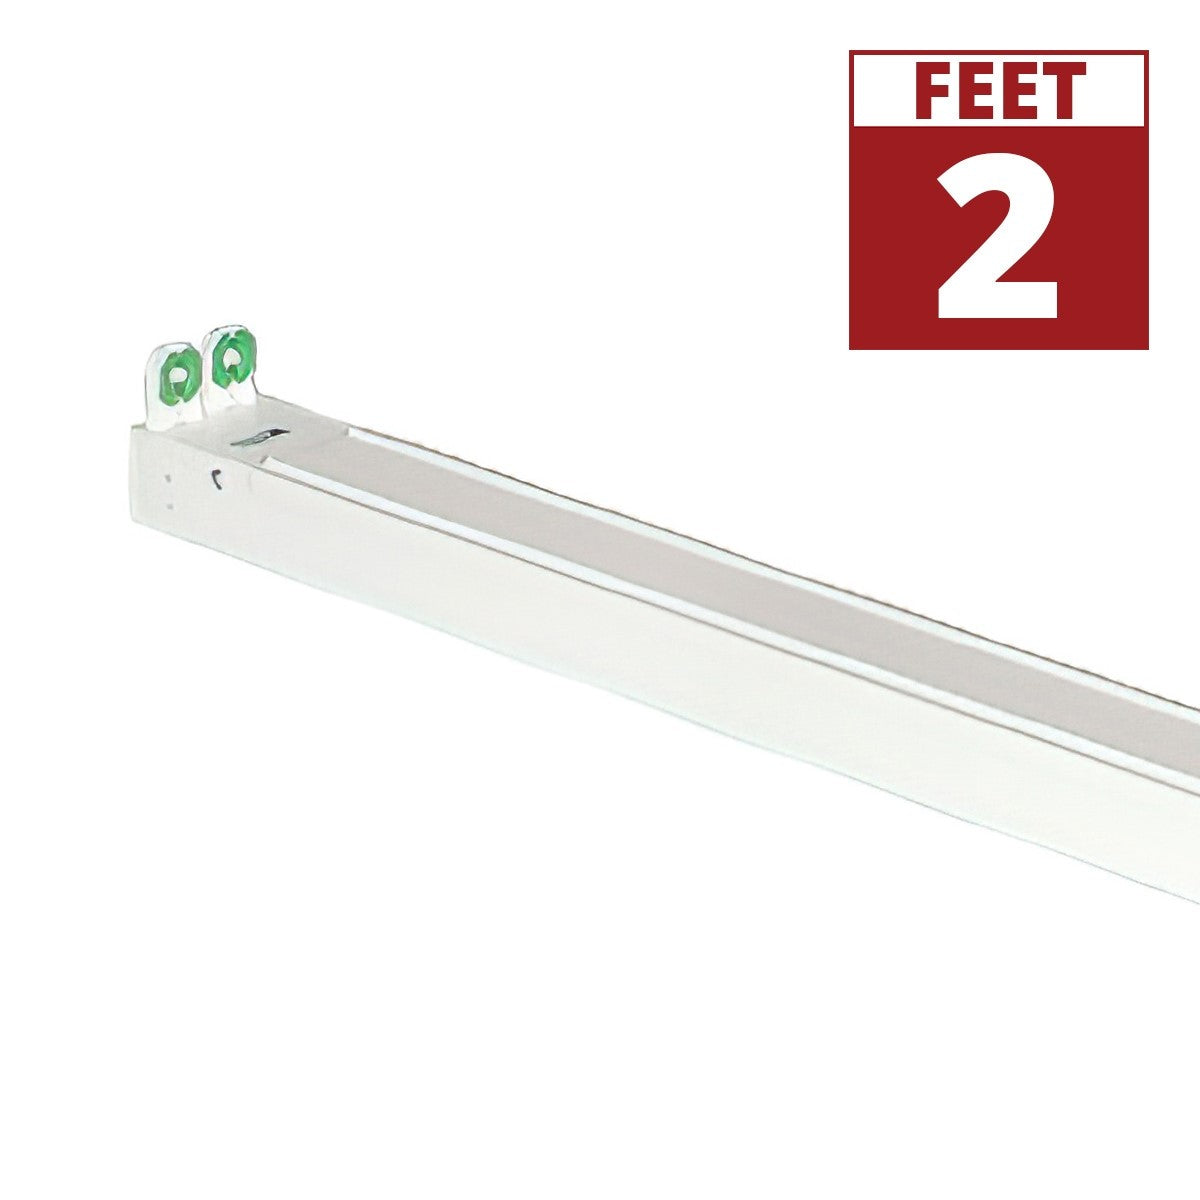 2ft LED Ready Strip Light 2-lamp Double End Wiring LED T8 Bulbs Not Included